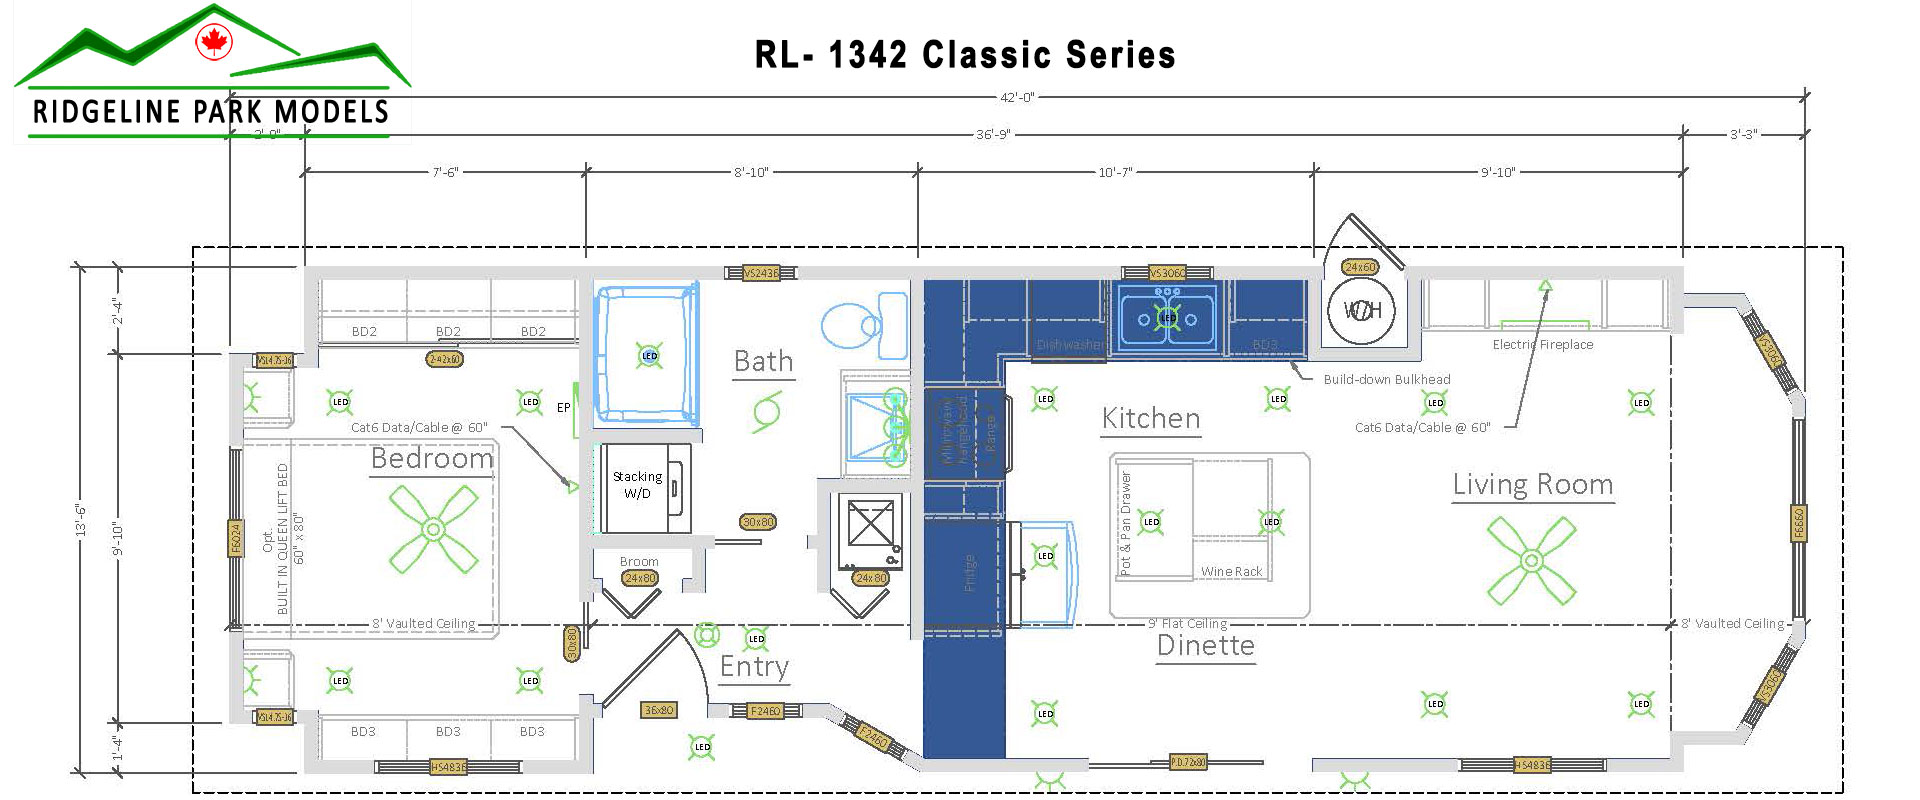 Plan RL-1342 Classic from Ridgeline Park Models, serving the Okanagan Valley and all British Columbia locations.